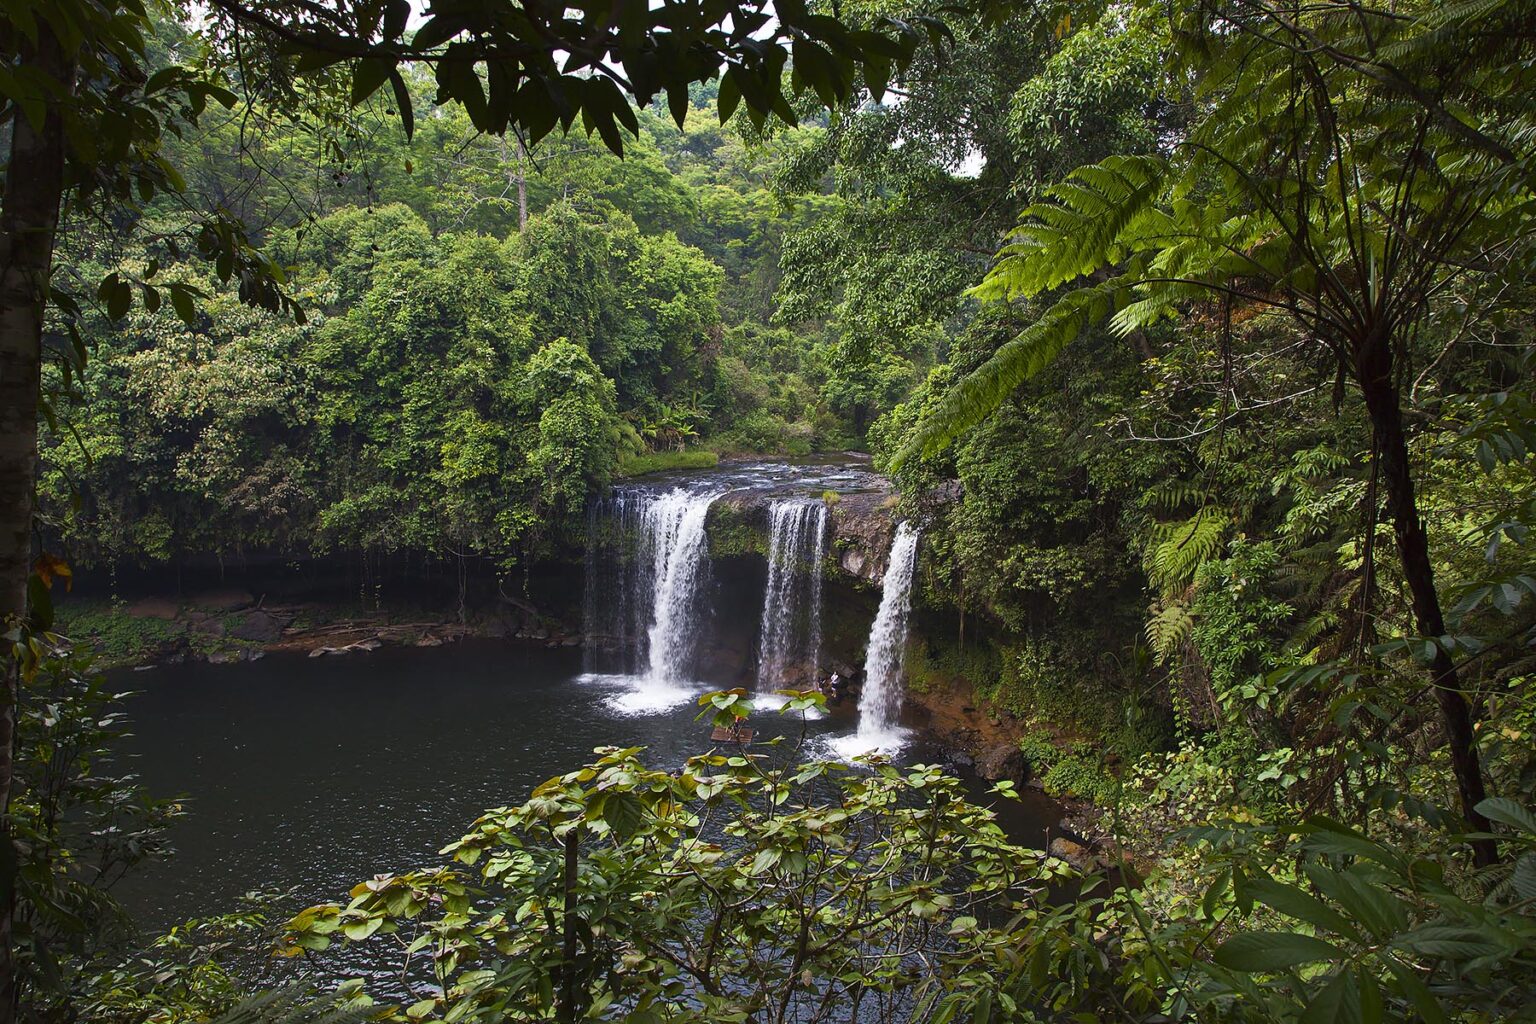 The CHAMPEE WATERFALL is located on the BOLAVEN PLATEAU near PAKSE - SOUTHERN, LAOS